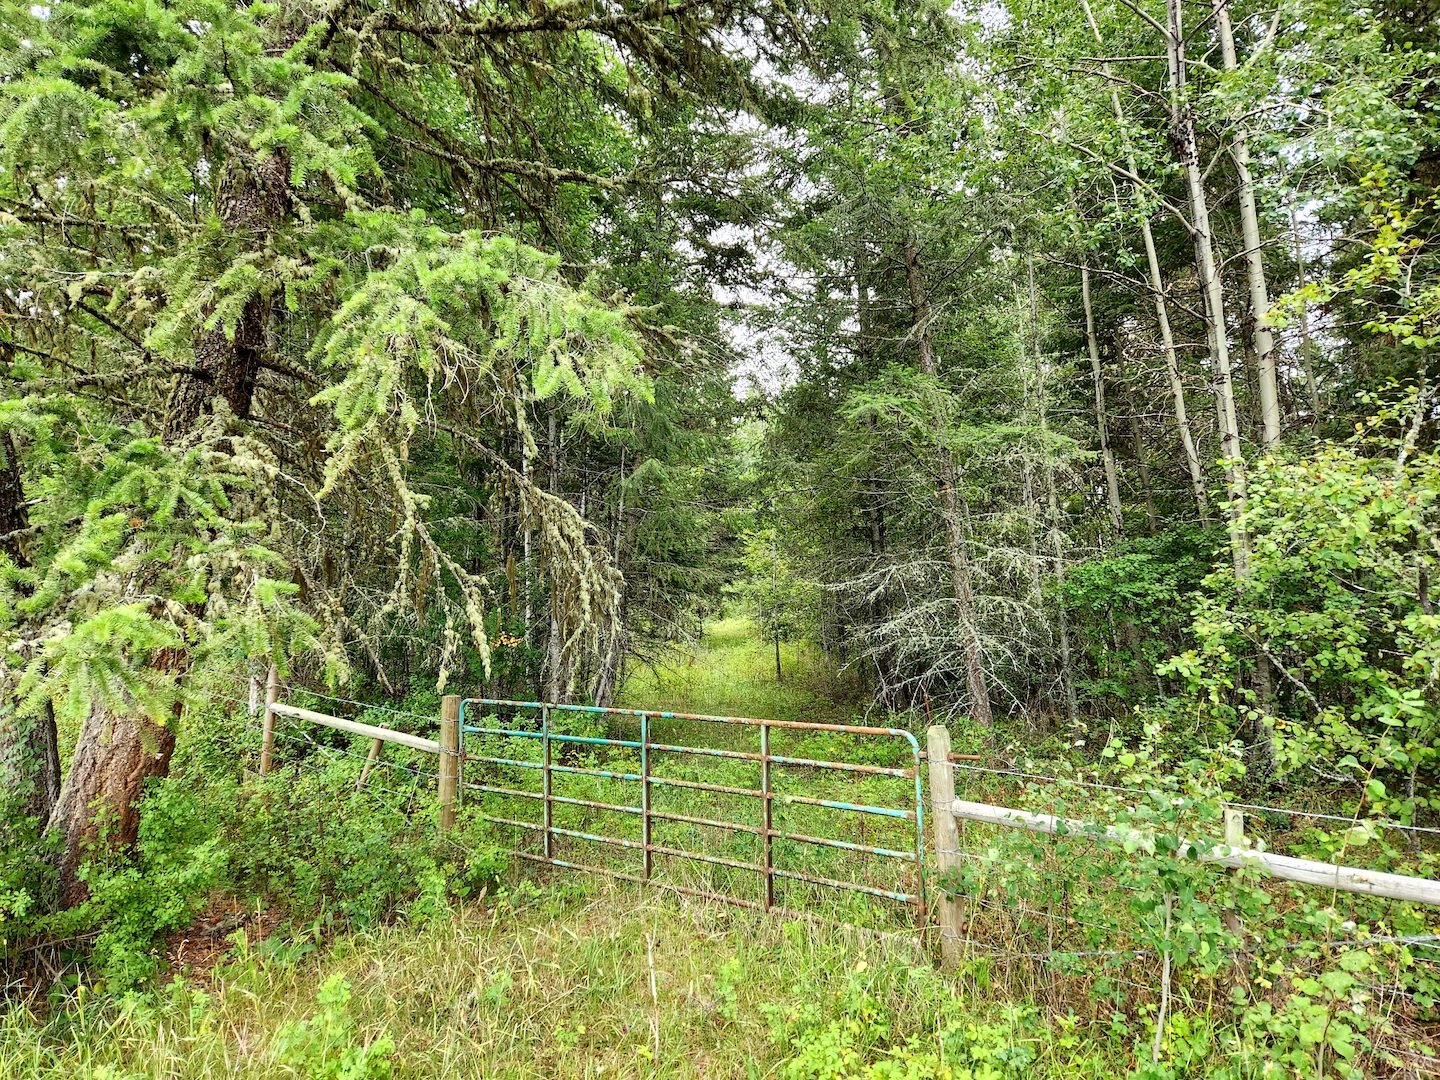 photo of a gate against a wild forest with an unkempt path through the trees